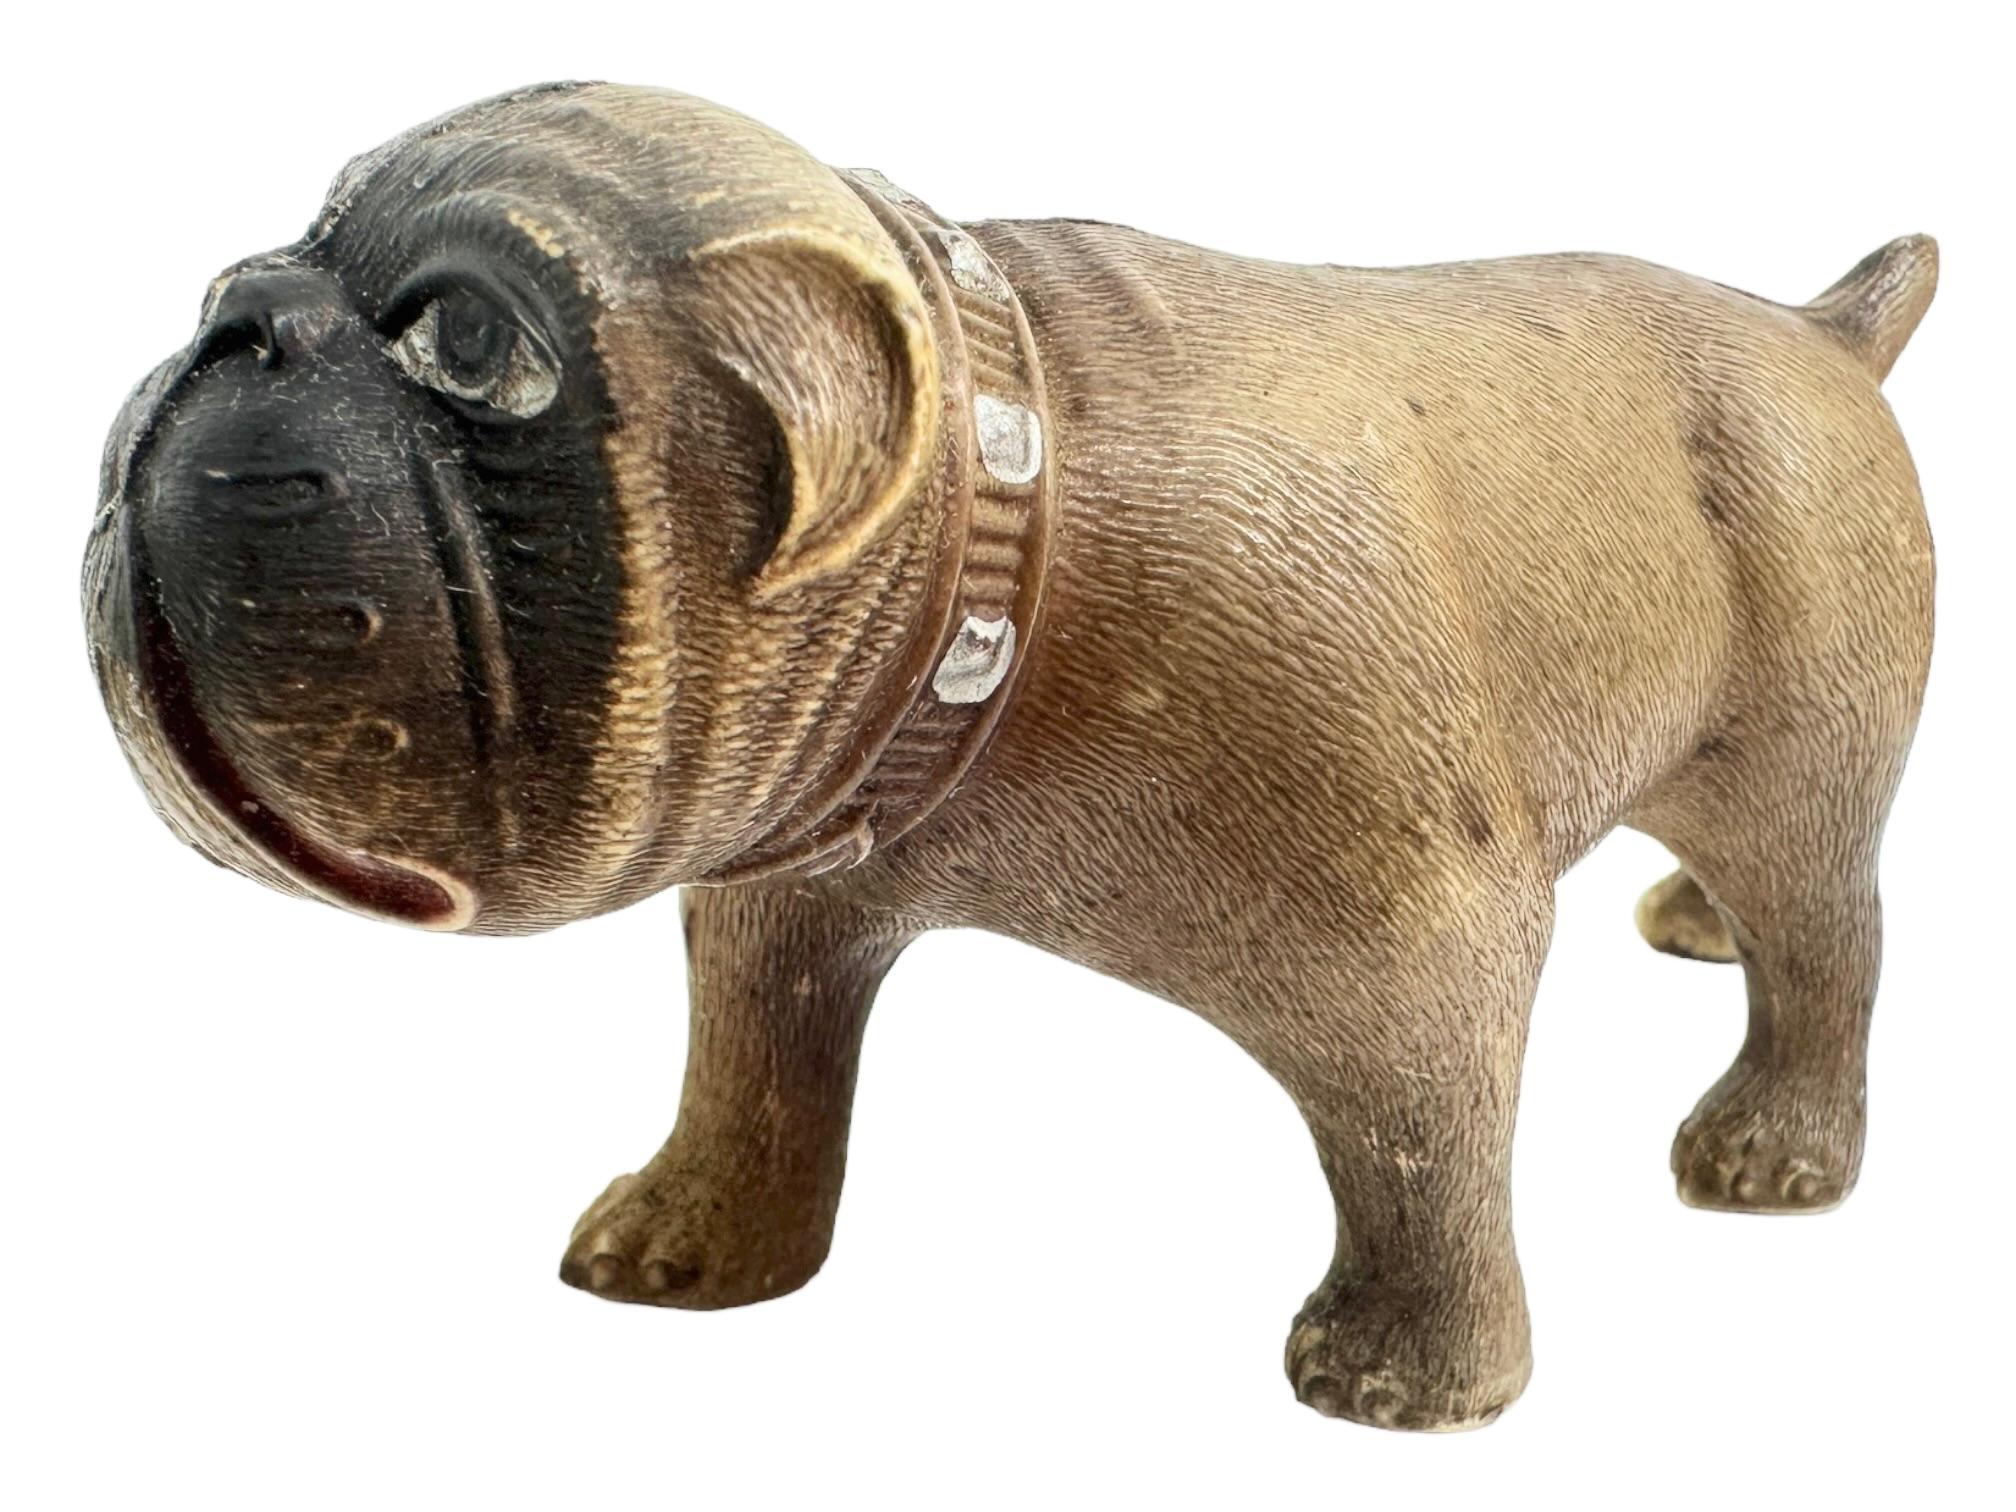 A rare pug or bulldog Figurine bought in Austria. It is made of Celluloid and very delicate, this would be a great addition for your Toy or Bulldog collection. It is in nice condition for this age, and has miner imperfections, but as you can see in